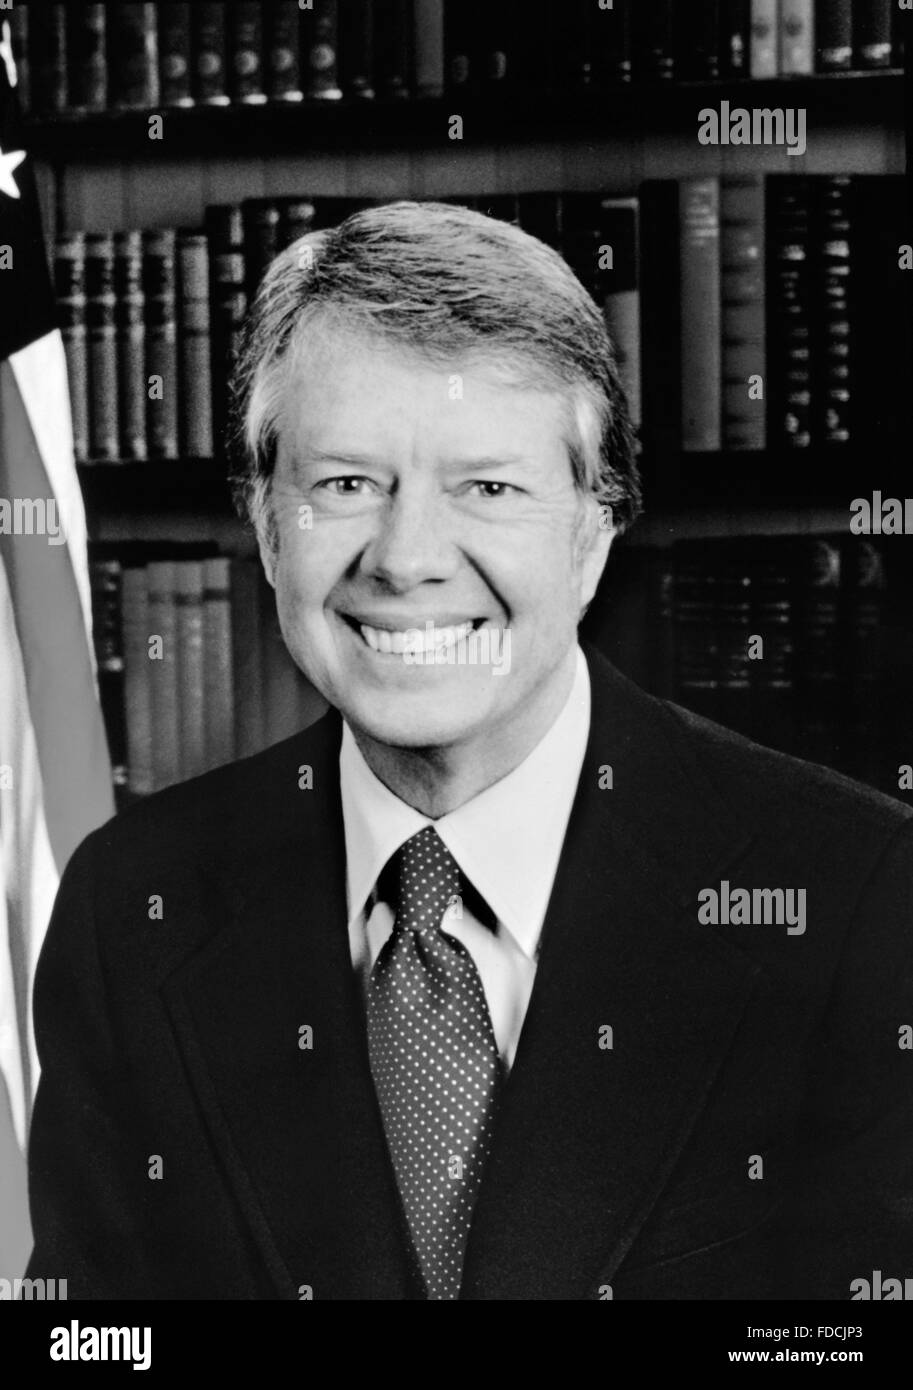 Jimmy Carter. Official White House photo of Jimmy Carter, 39th President of the USA, January 1977 Stock Photo